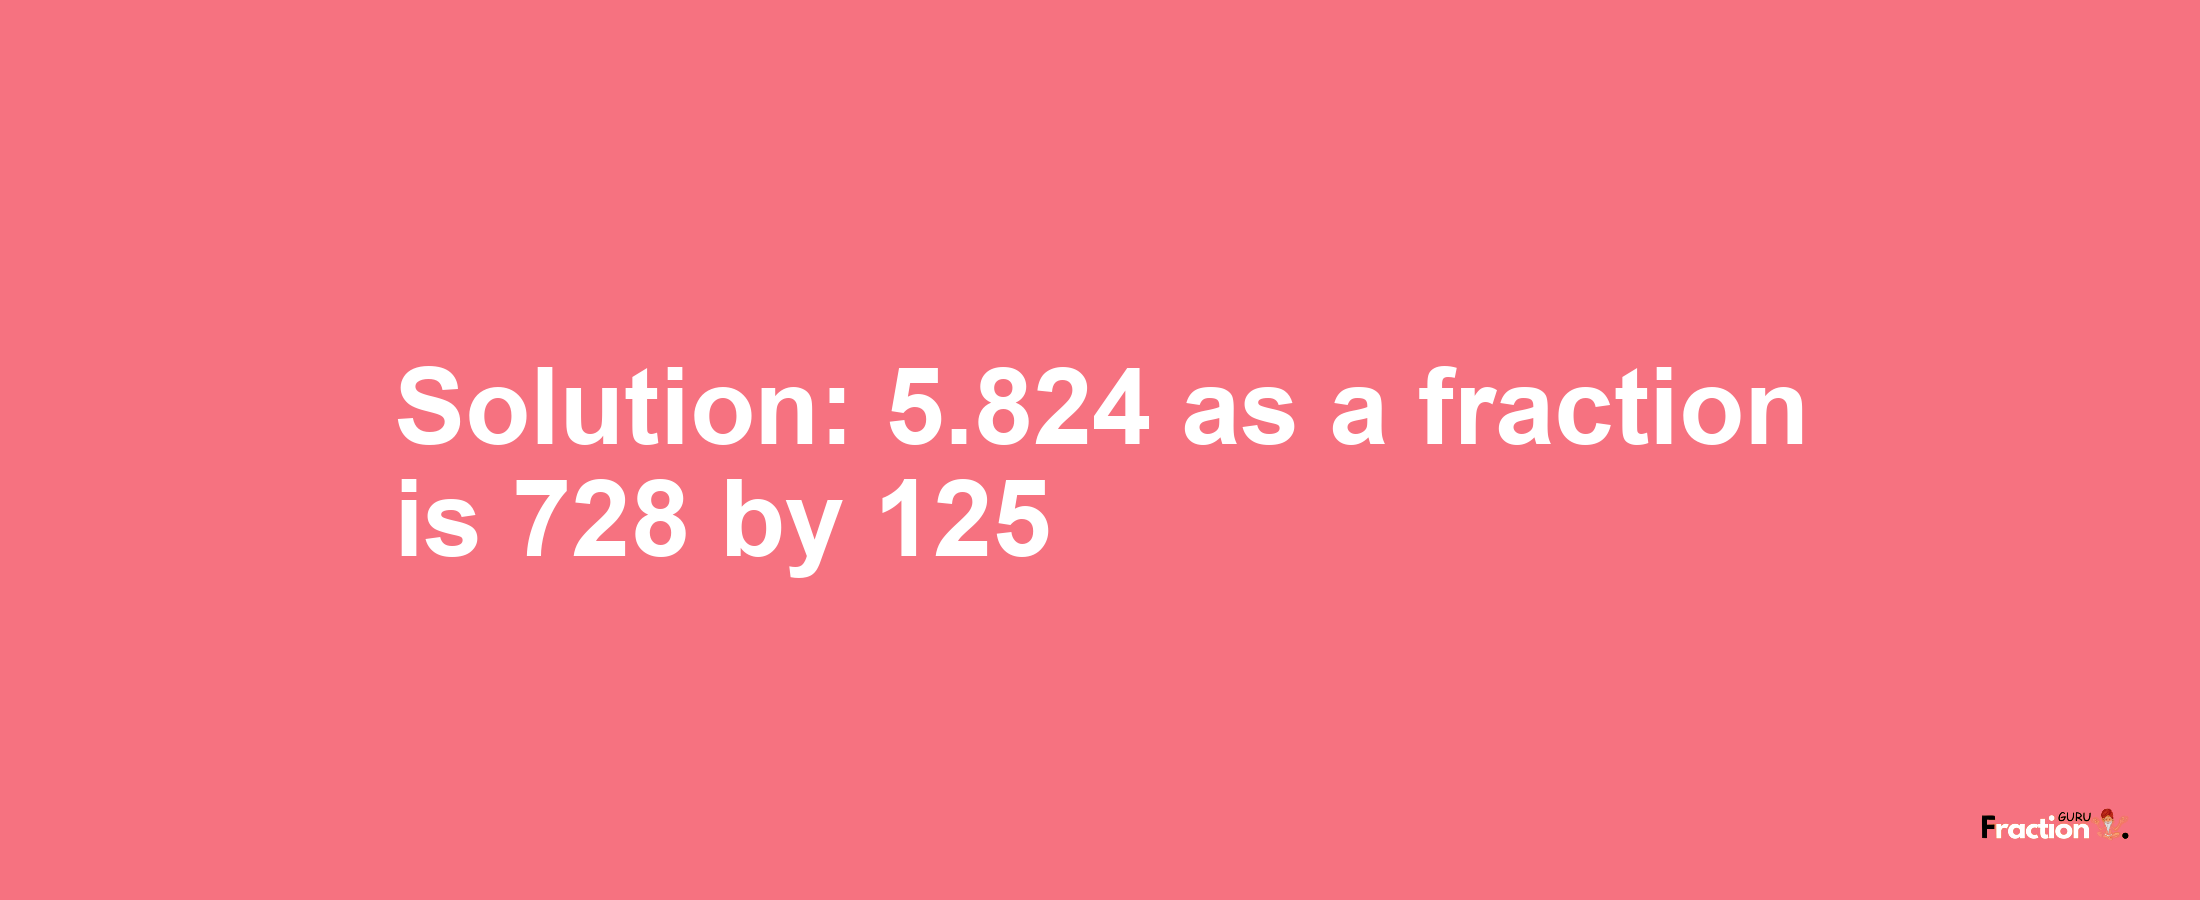 Solution:5.824 as a fraction is 728/125